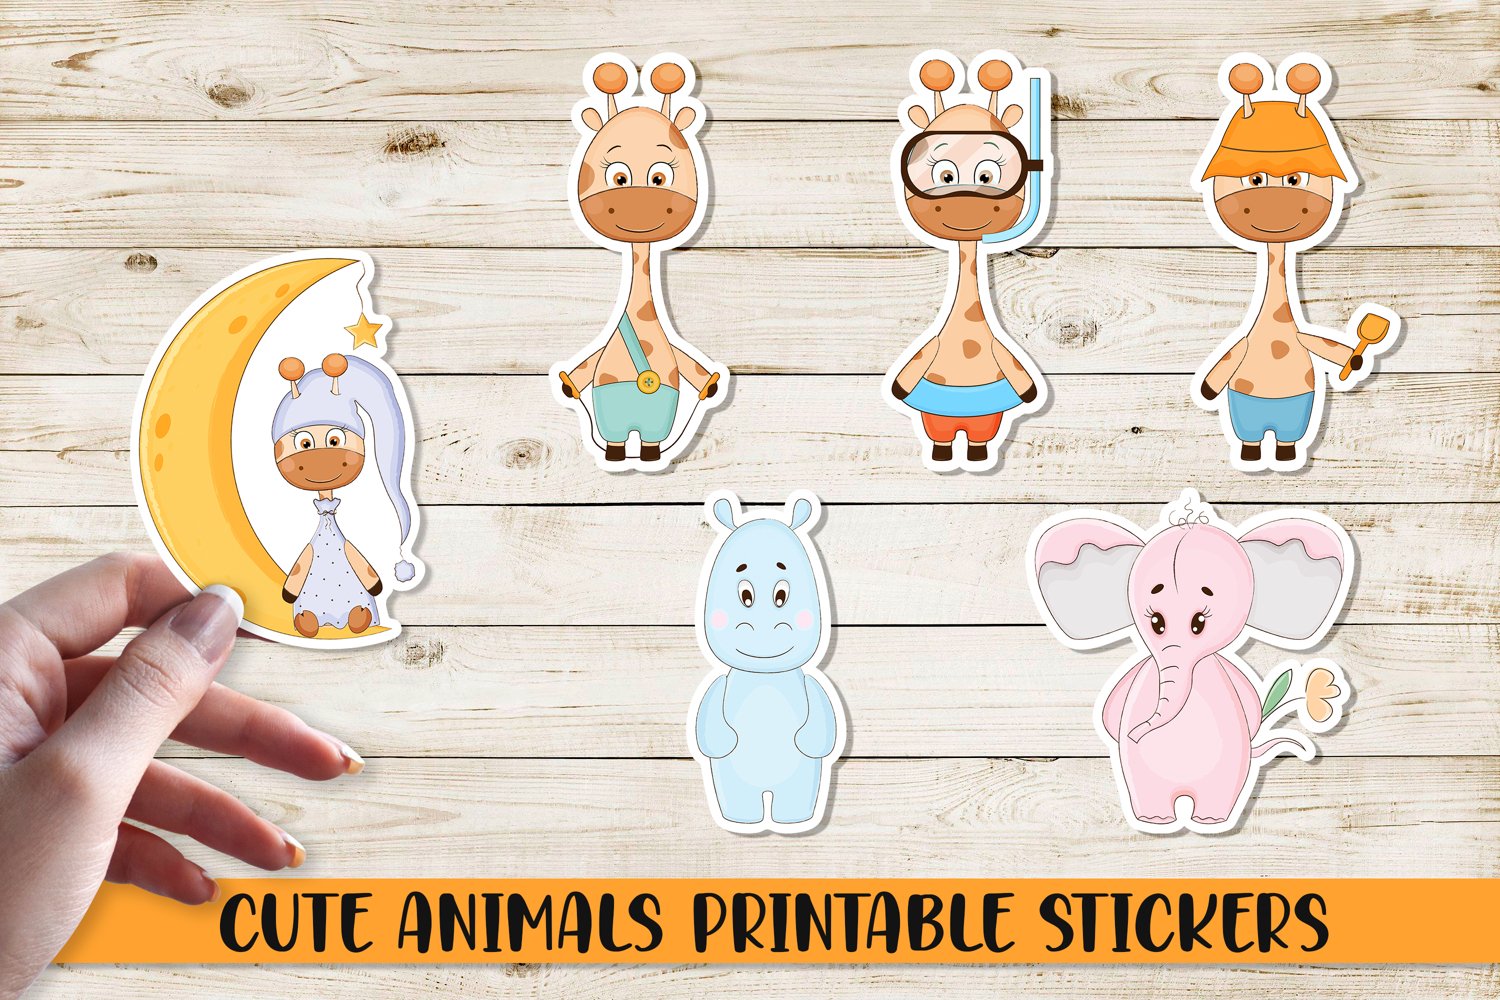 Cute animals printable stickers.